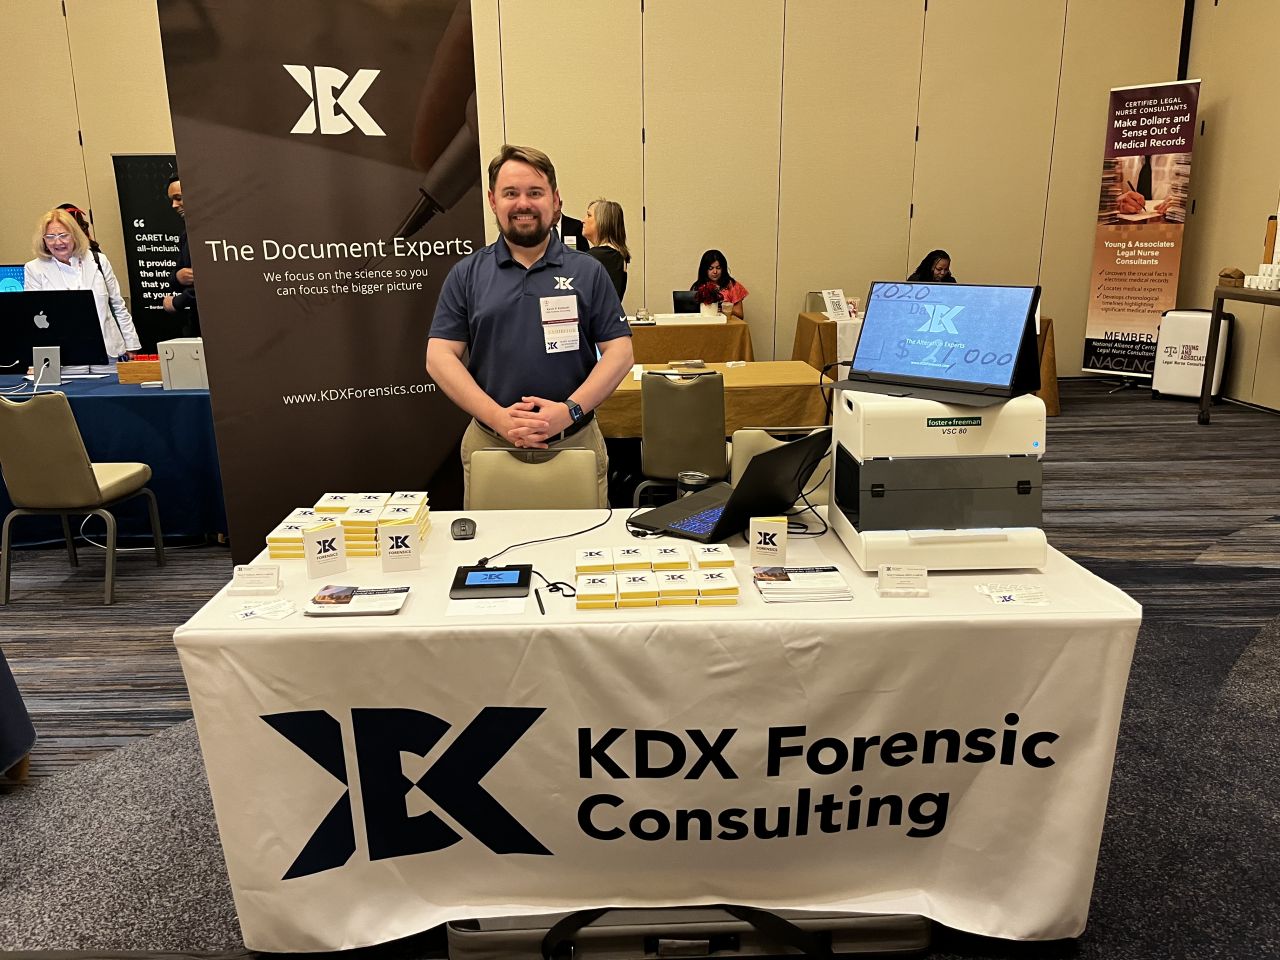 KDX Forensic Consulting